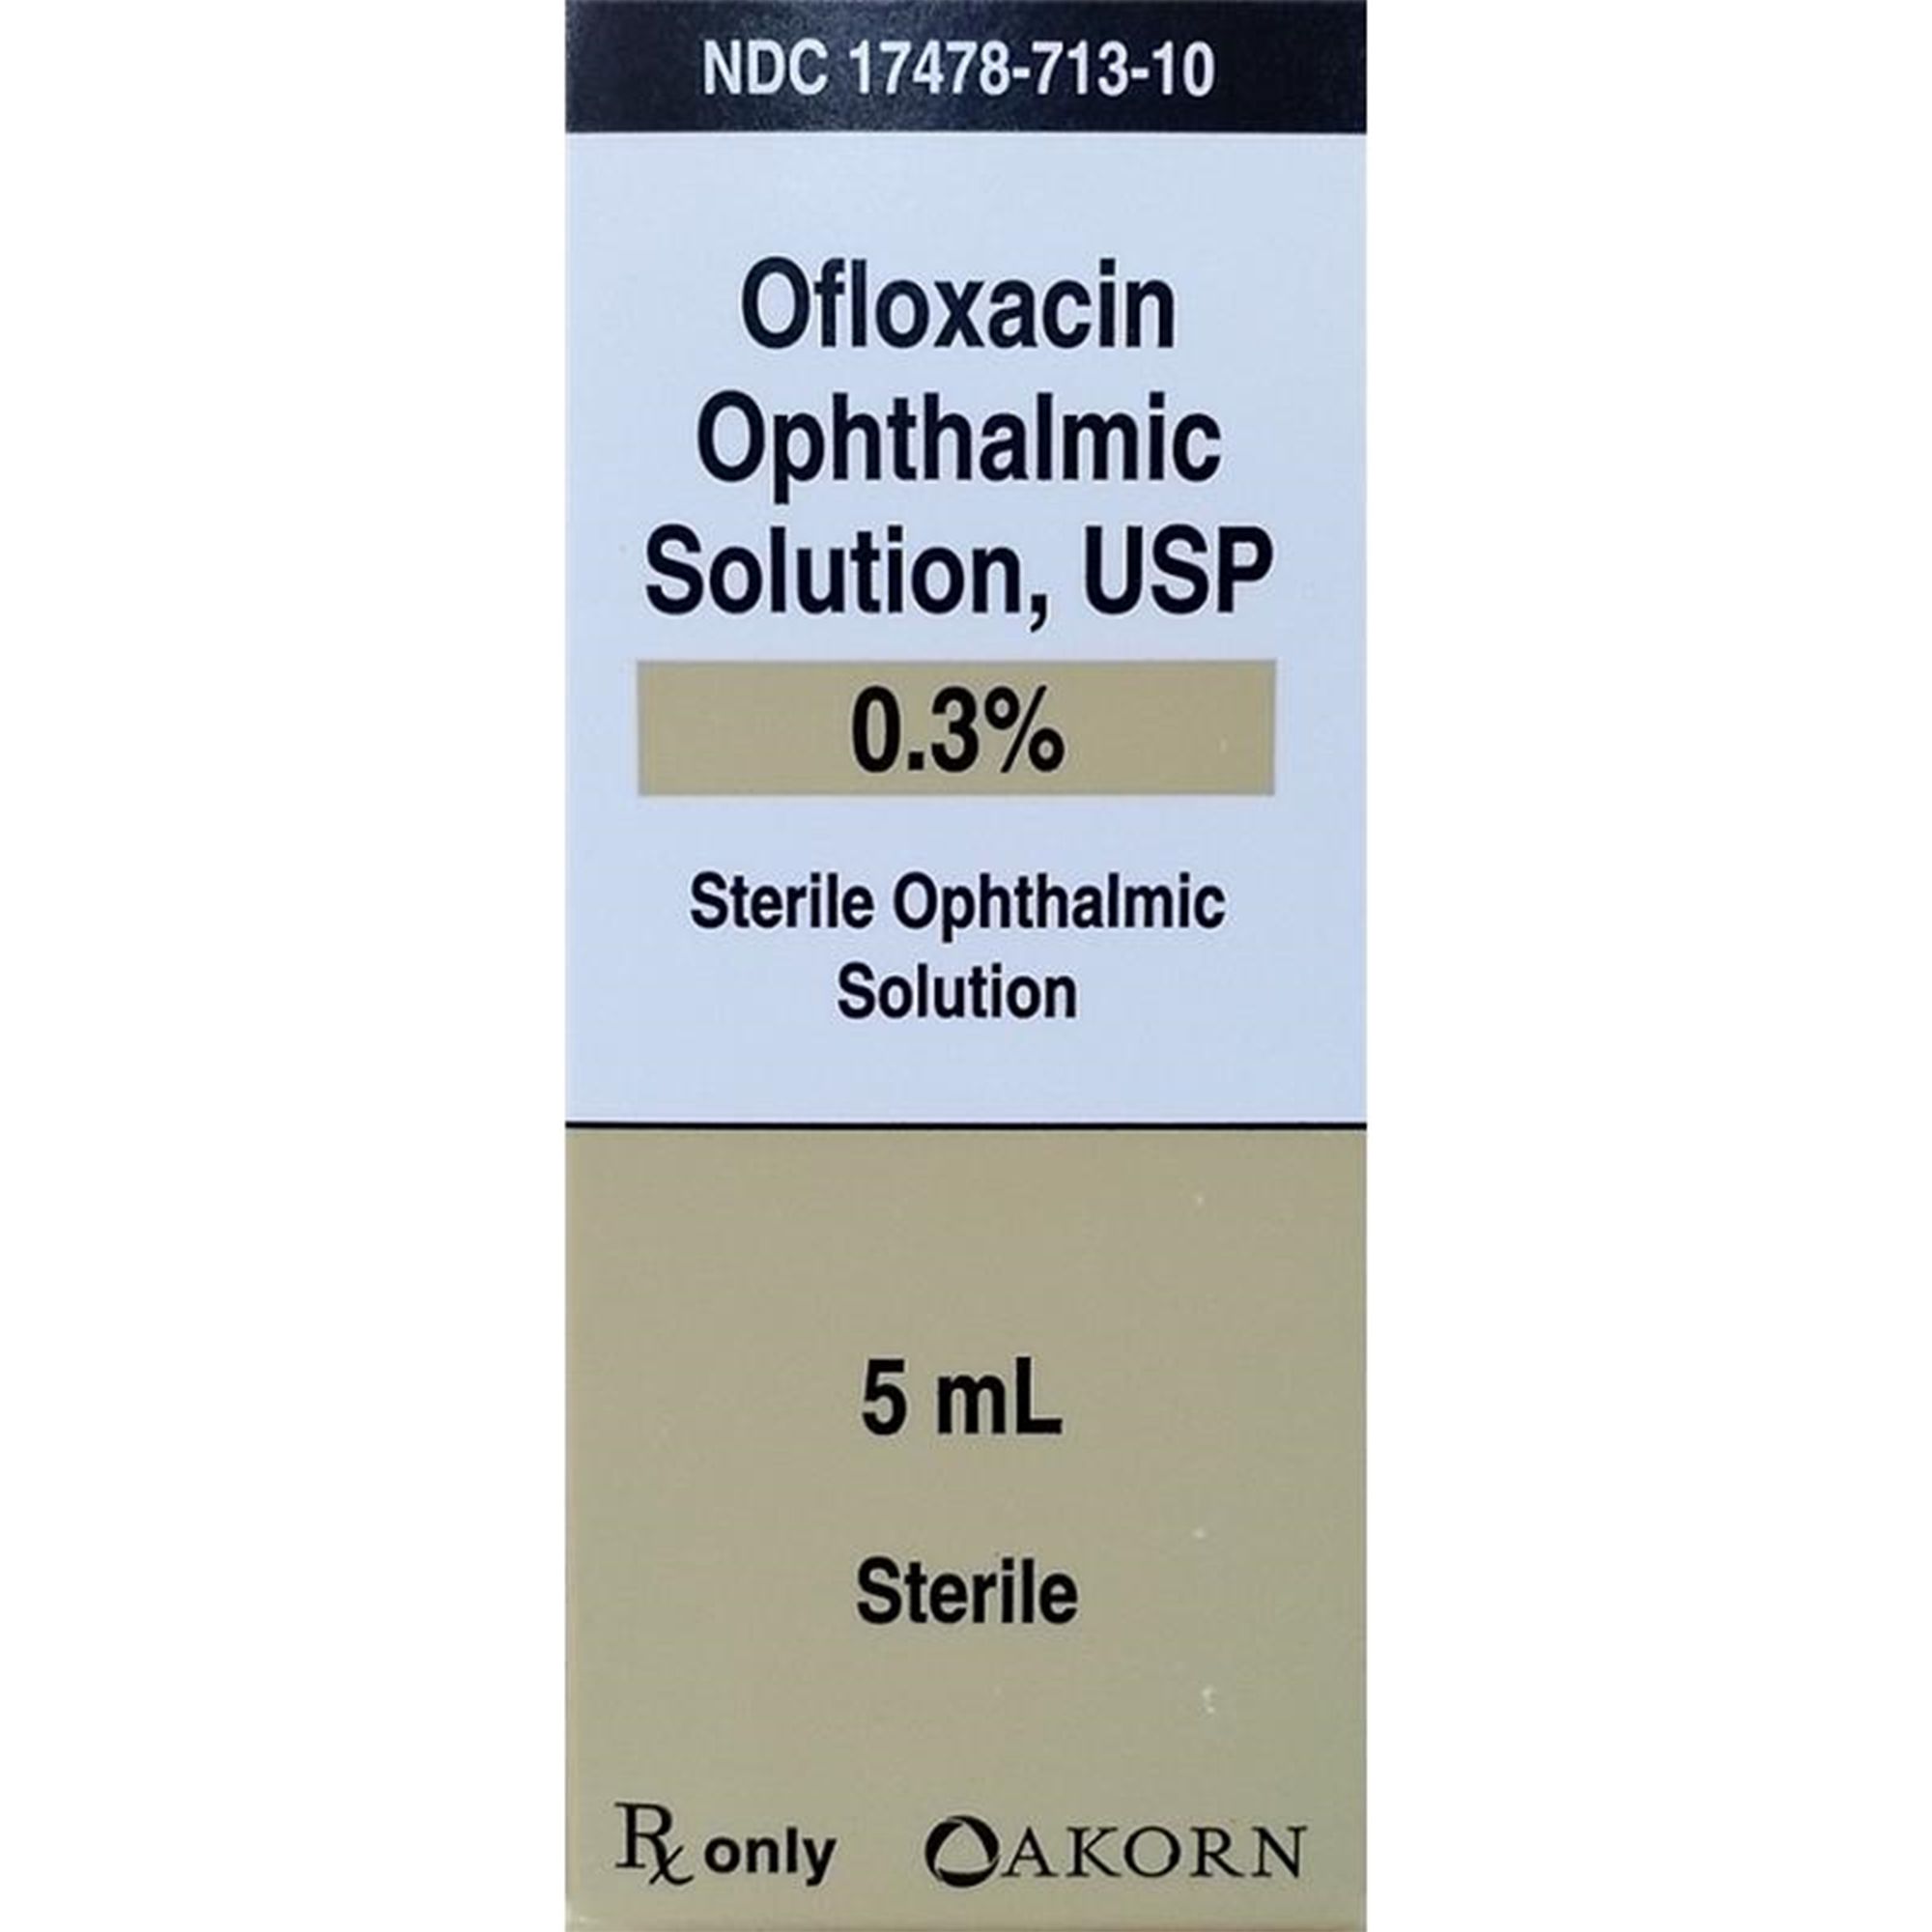 Fastest Can Ofloxacin Ophthalmic Solution Be Used For Ear Infection